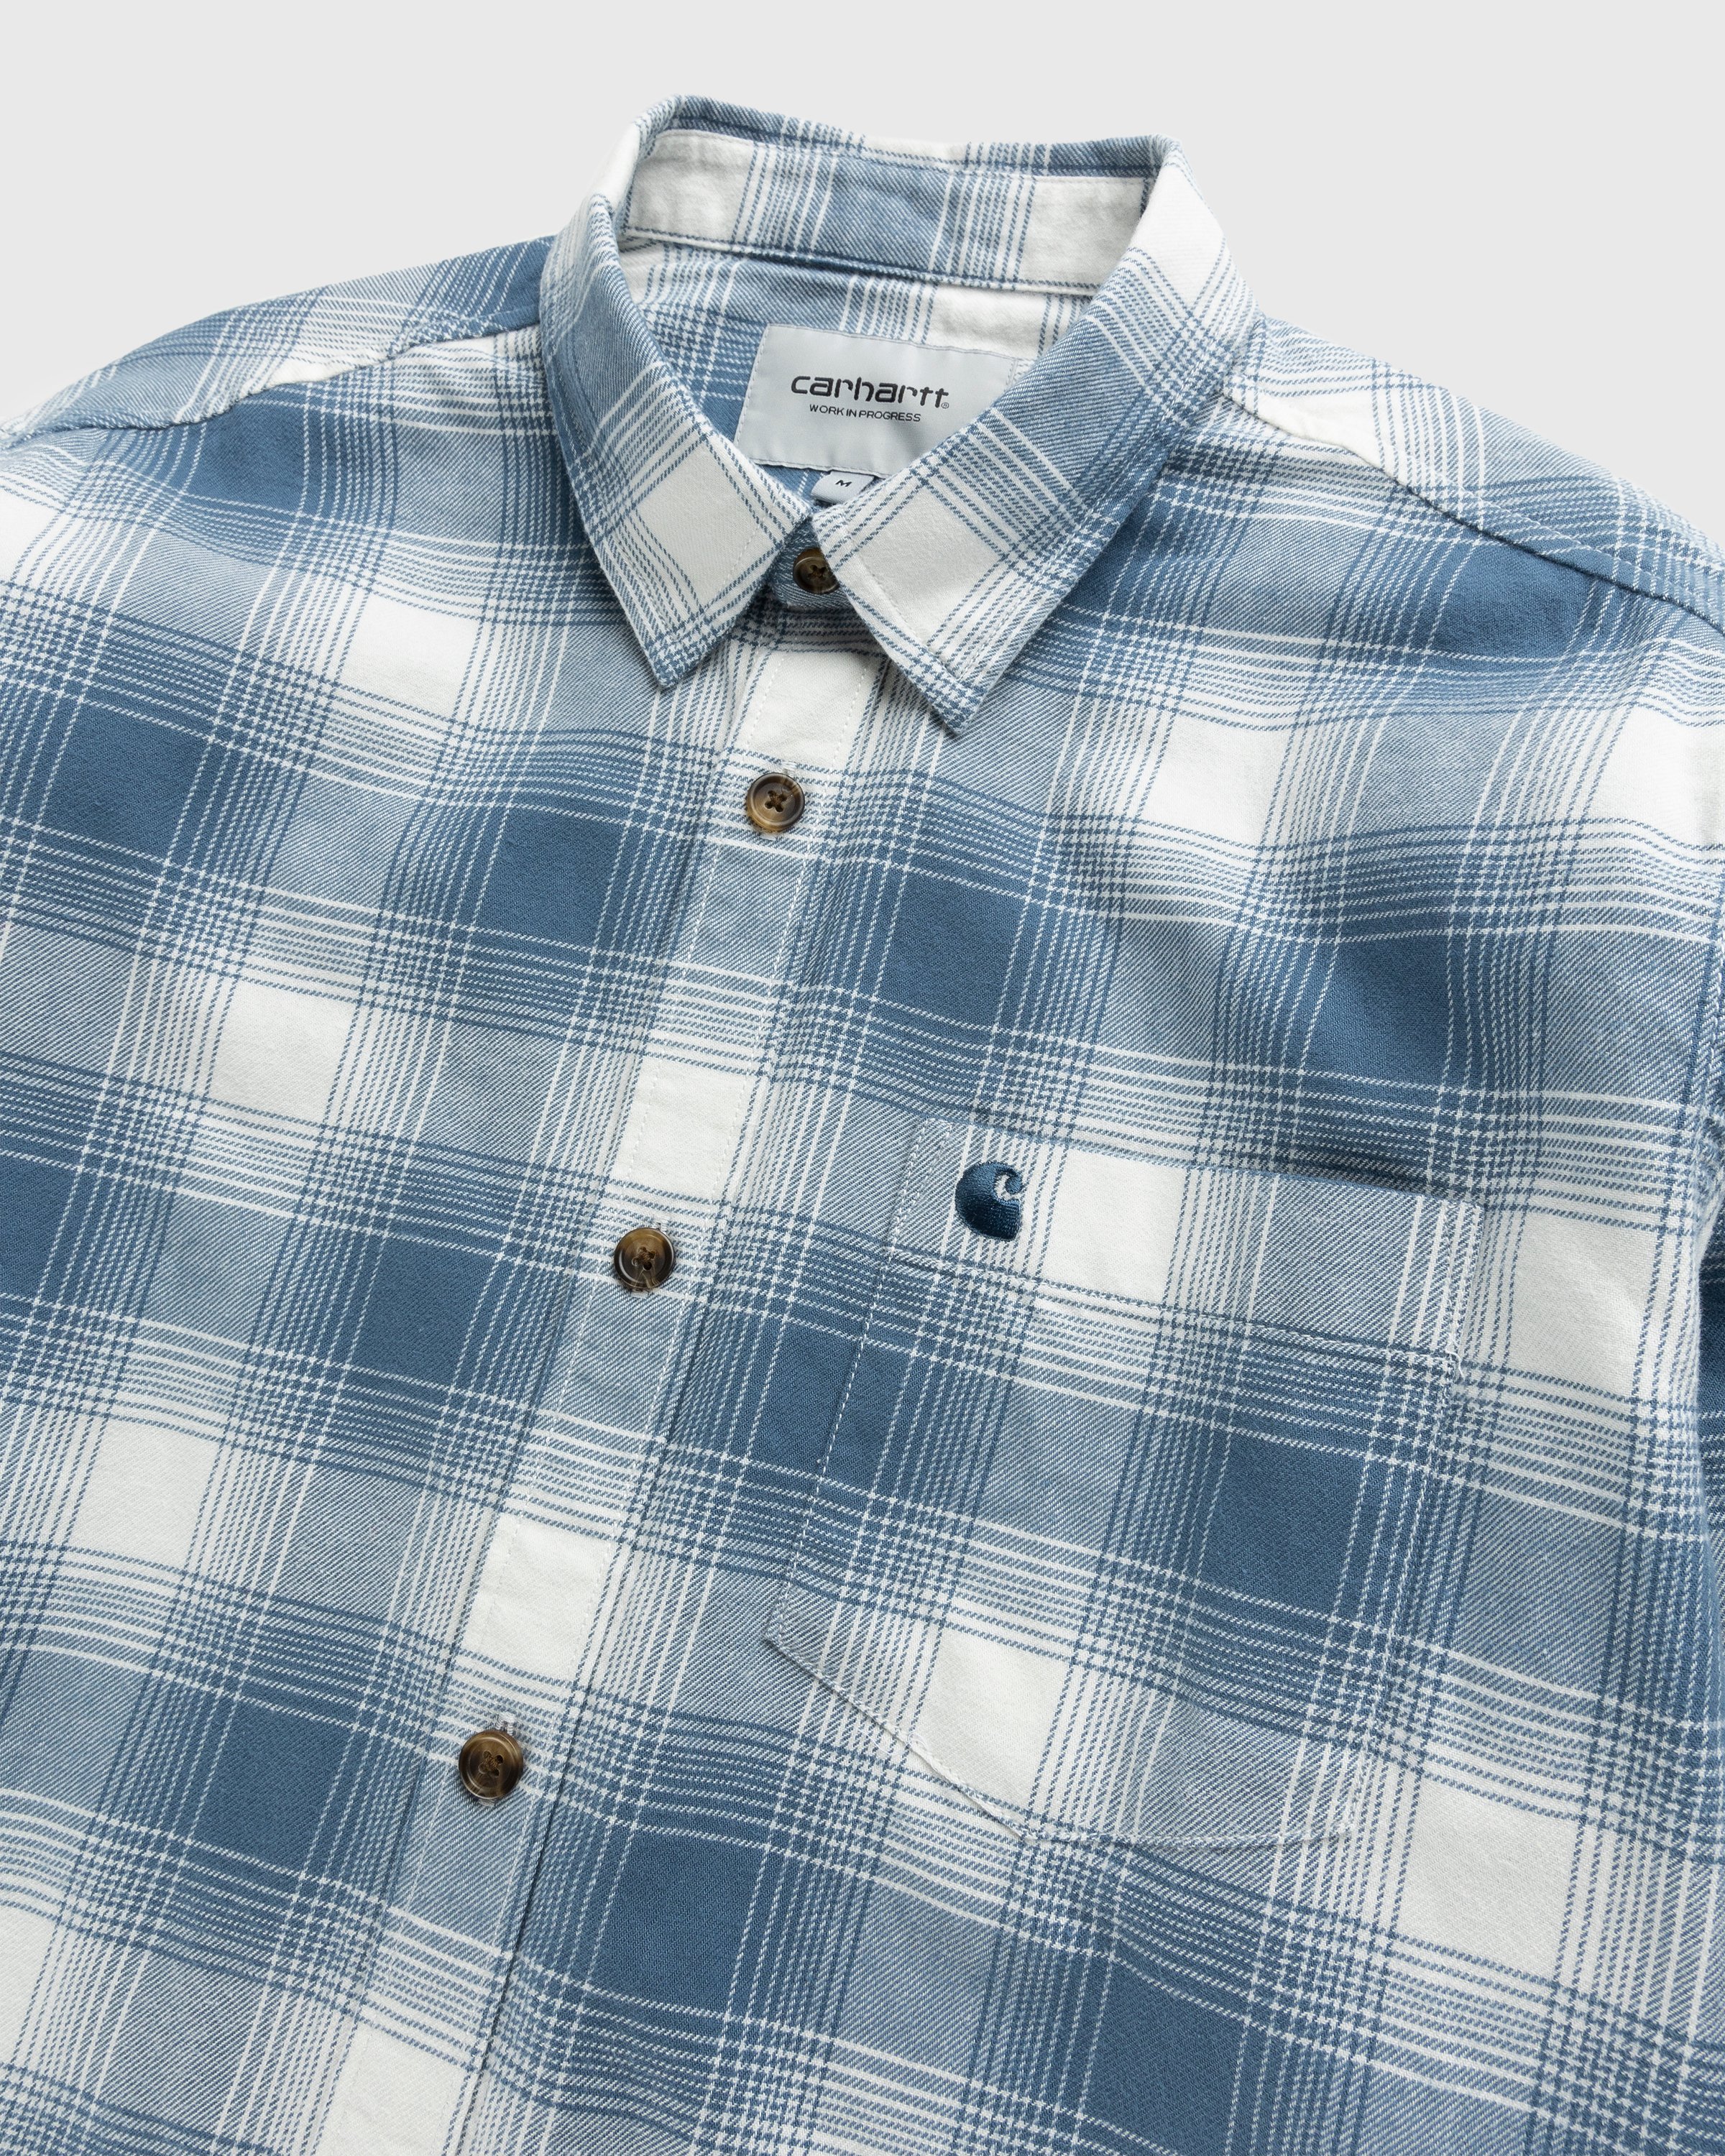 Carhartt WIP - Deaver Flannel Shirt Storm Blue - Clothing - Blue - Image 3